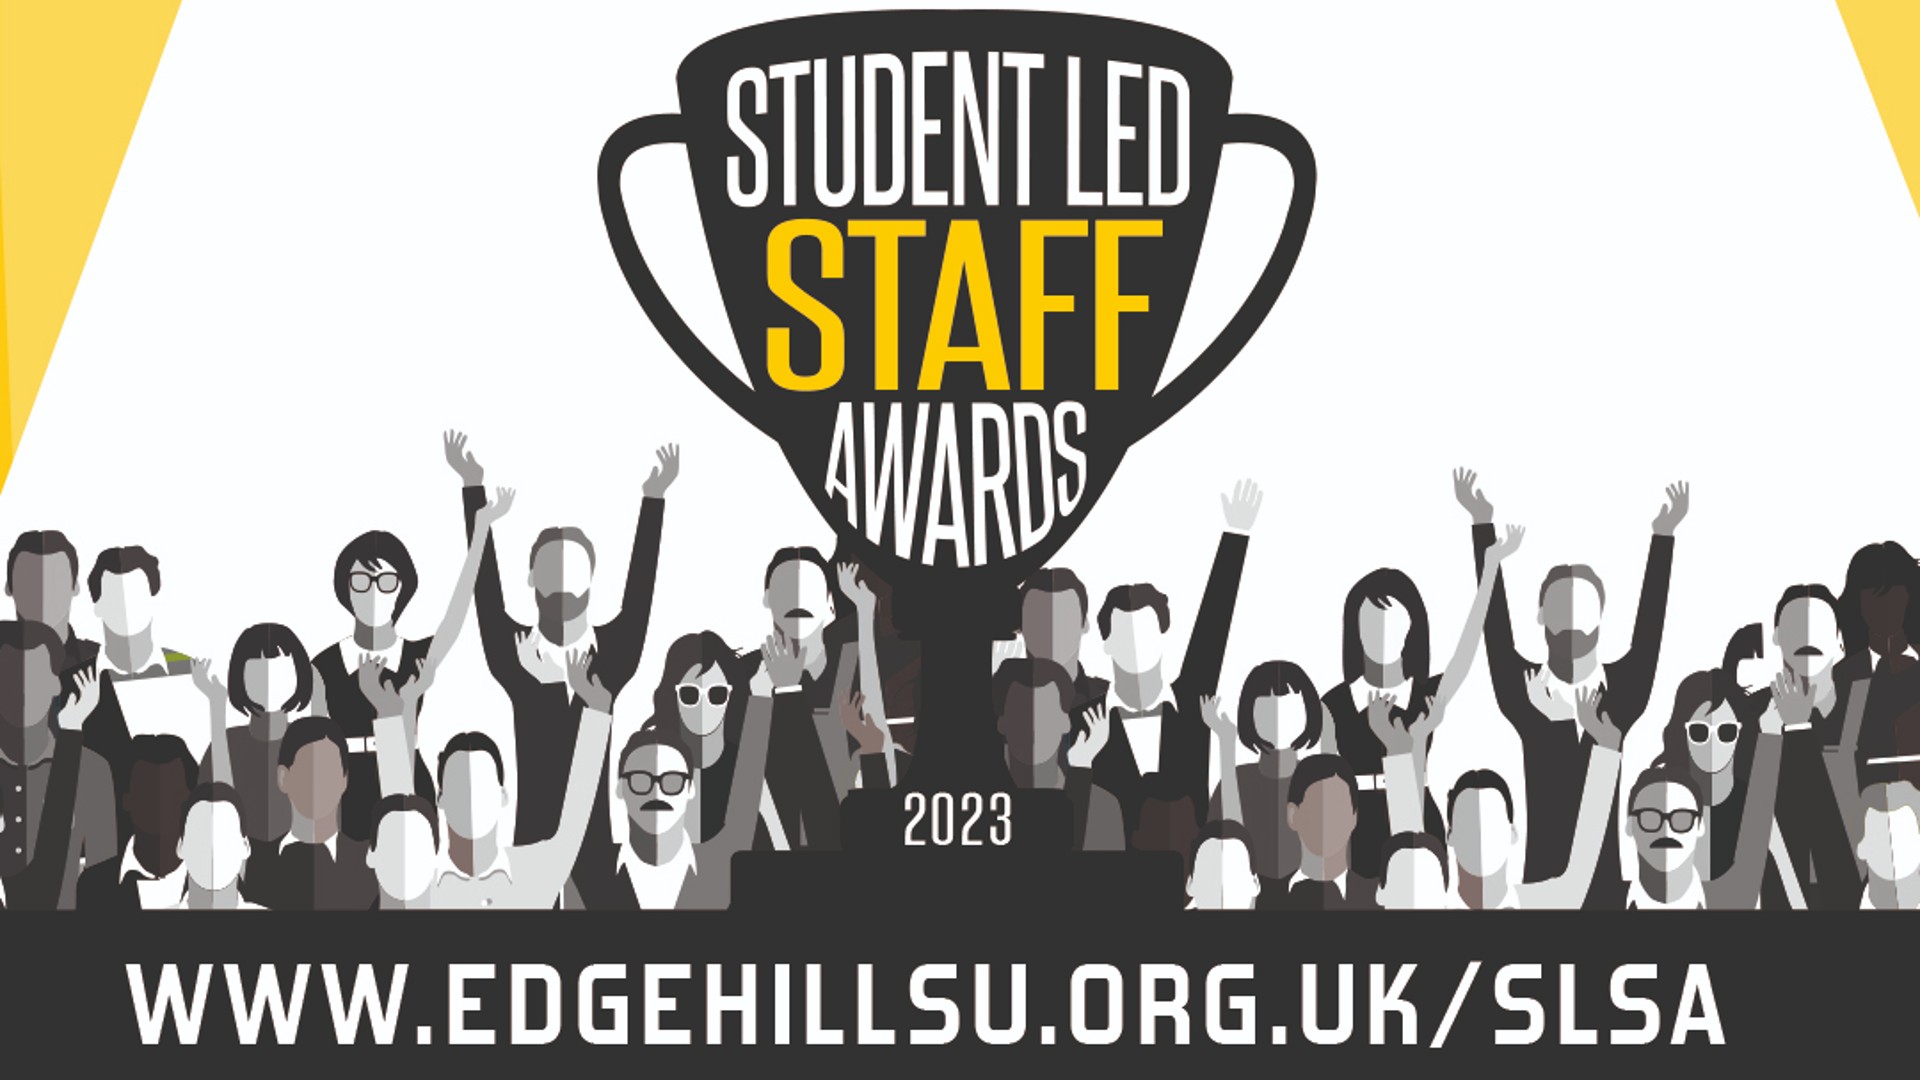 Yellow poster advertising the Student Led Staff Awards.